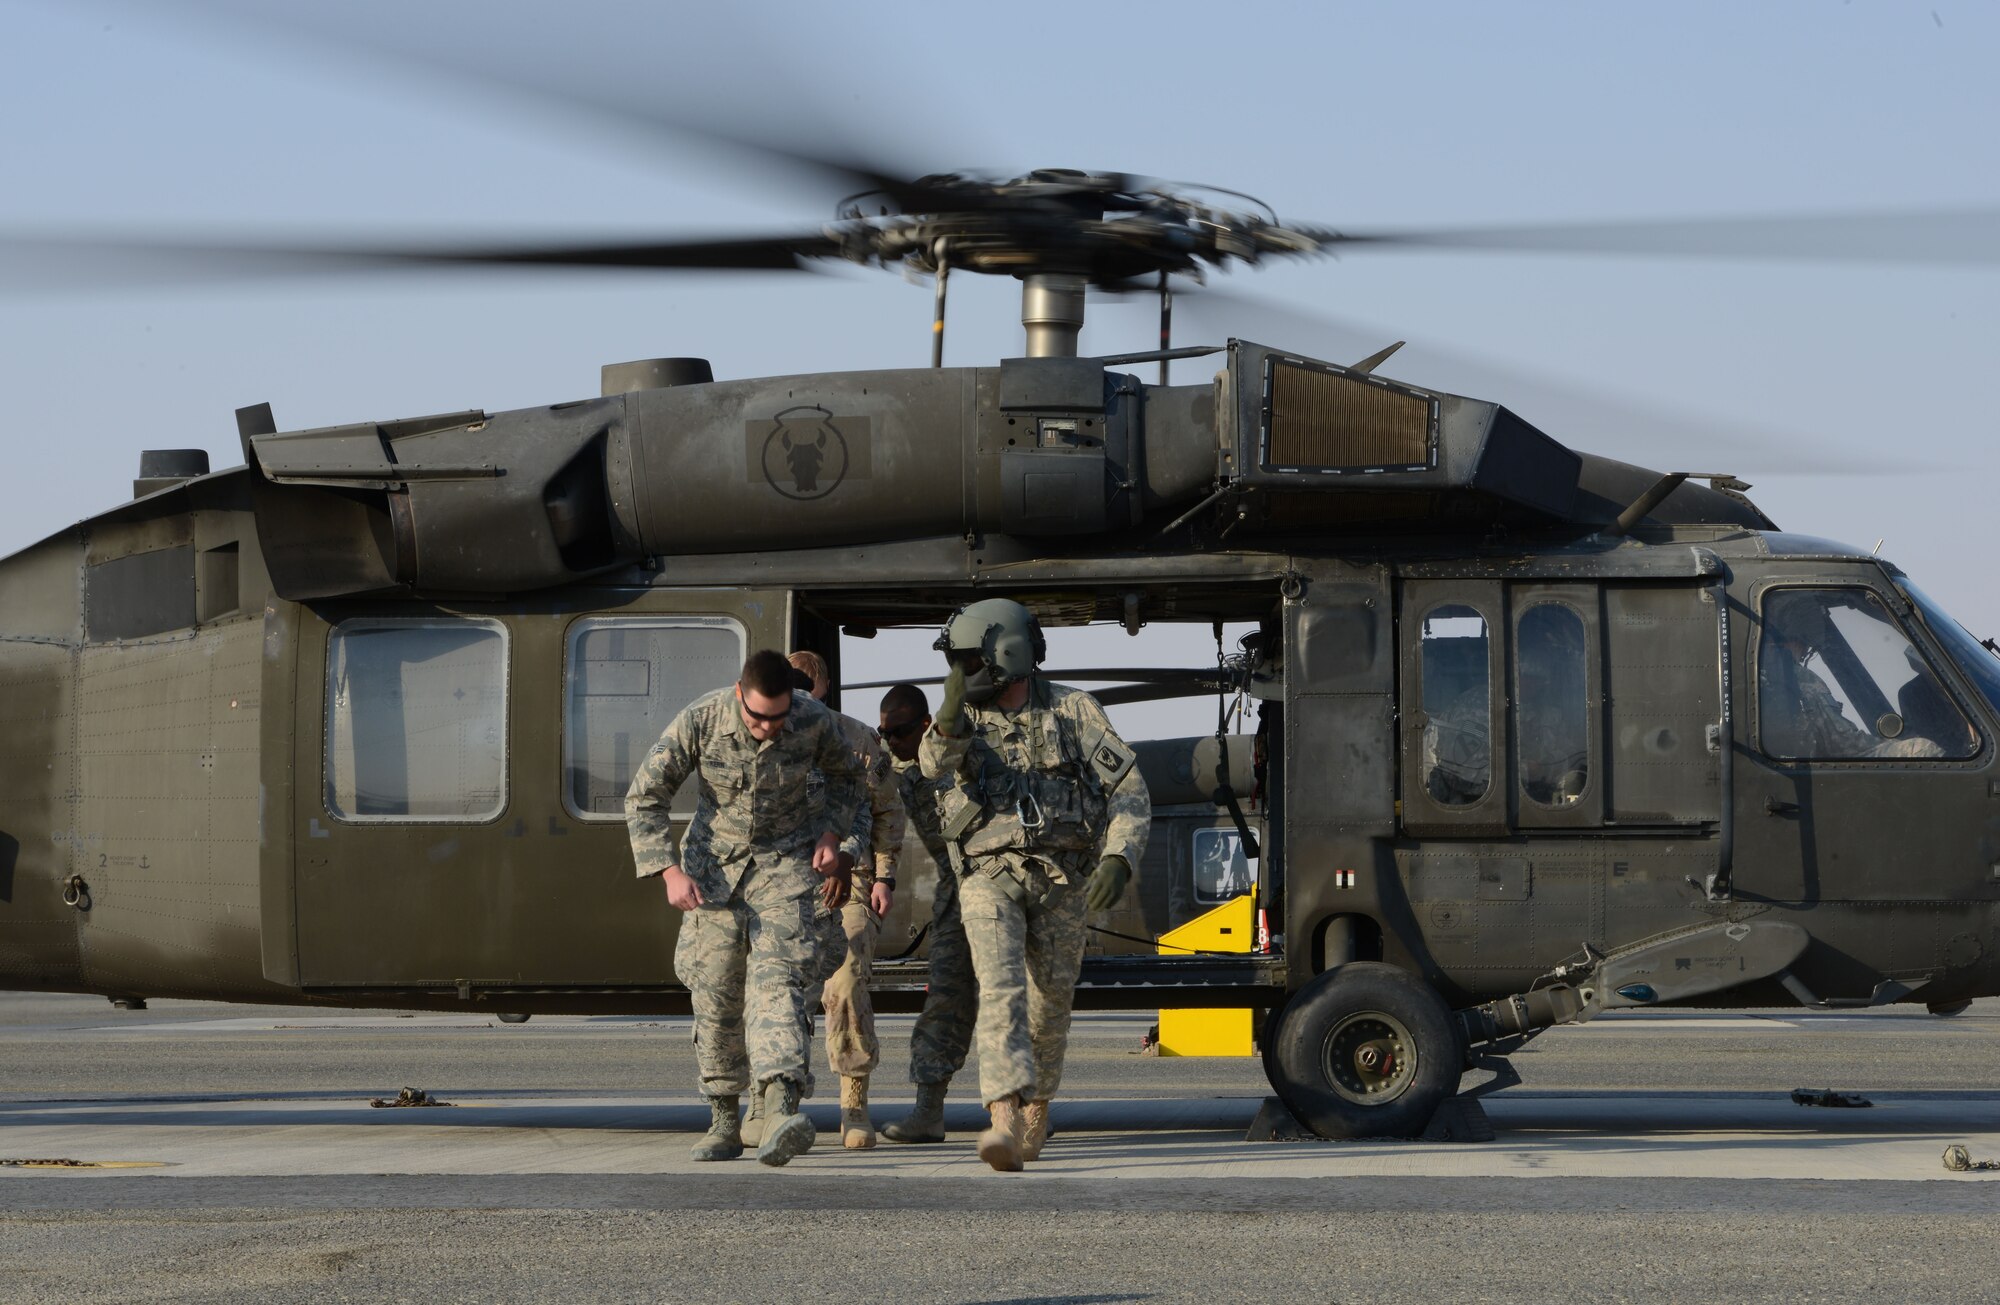 Airmen from the 386th Expeditionary Medical group return from a UH-60 BlackHawk helicopter after loading a patient during medical evacuation training Nov. 14, 2014. Airmen from the 386th EMDG and Italian and Canadian air forces received the training Nov. 14 and 16. (U.S. Air Force photo by Tech. Sgt. Jared Marquis/released)